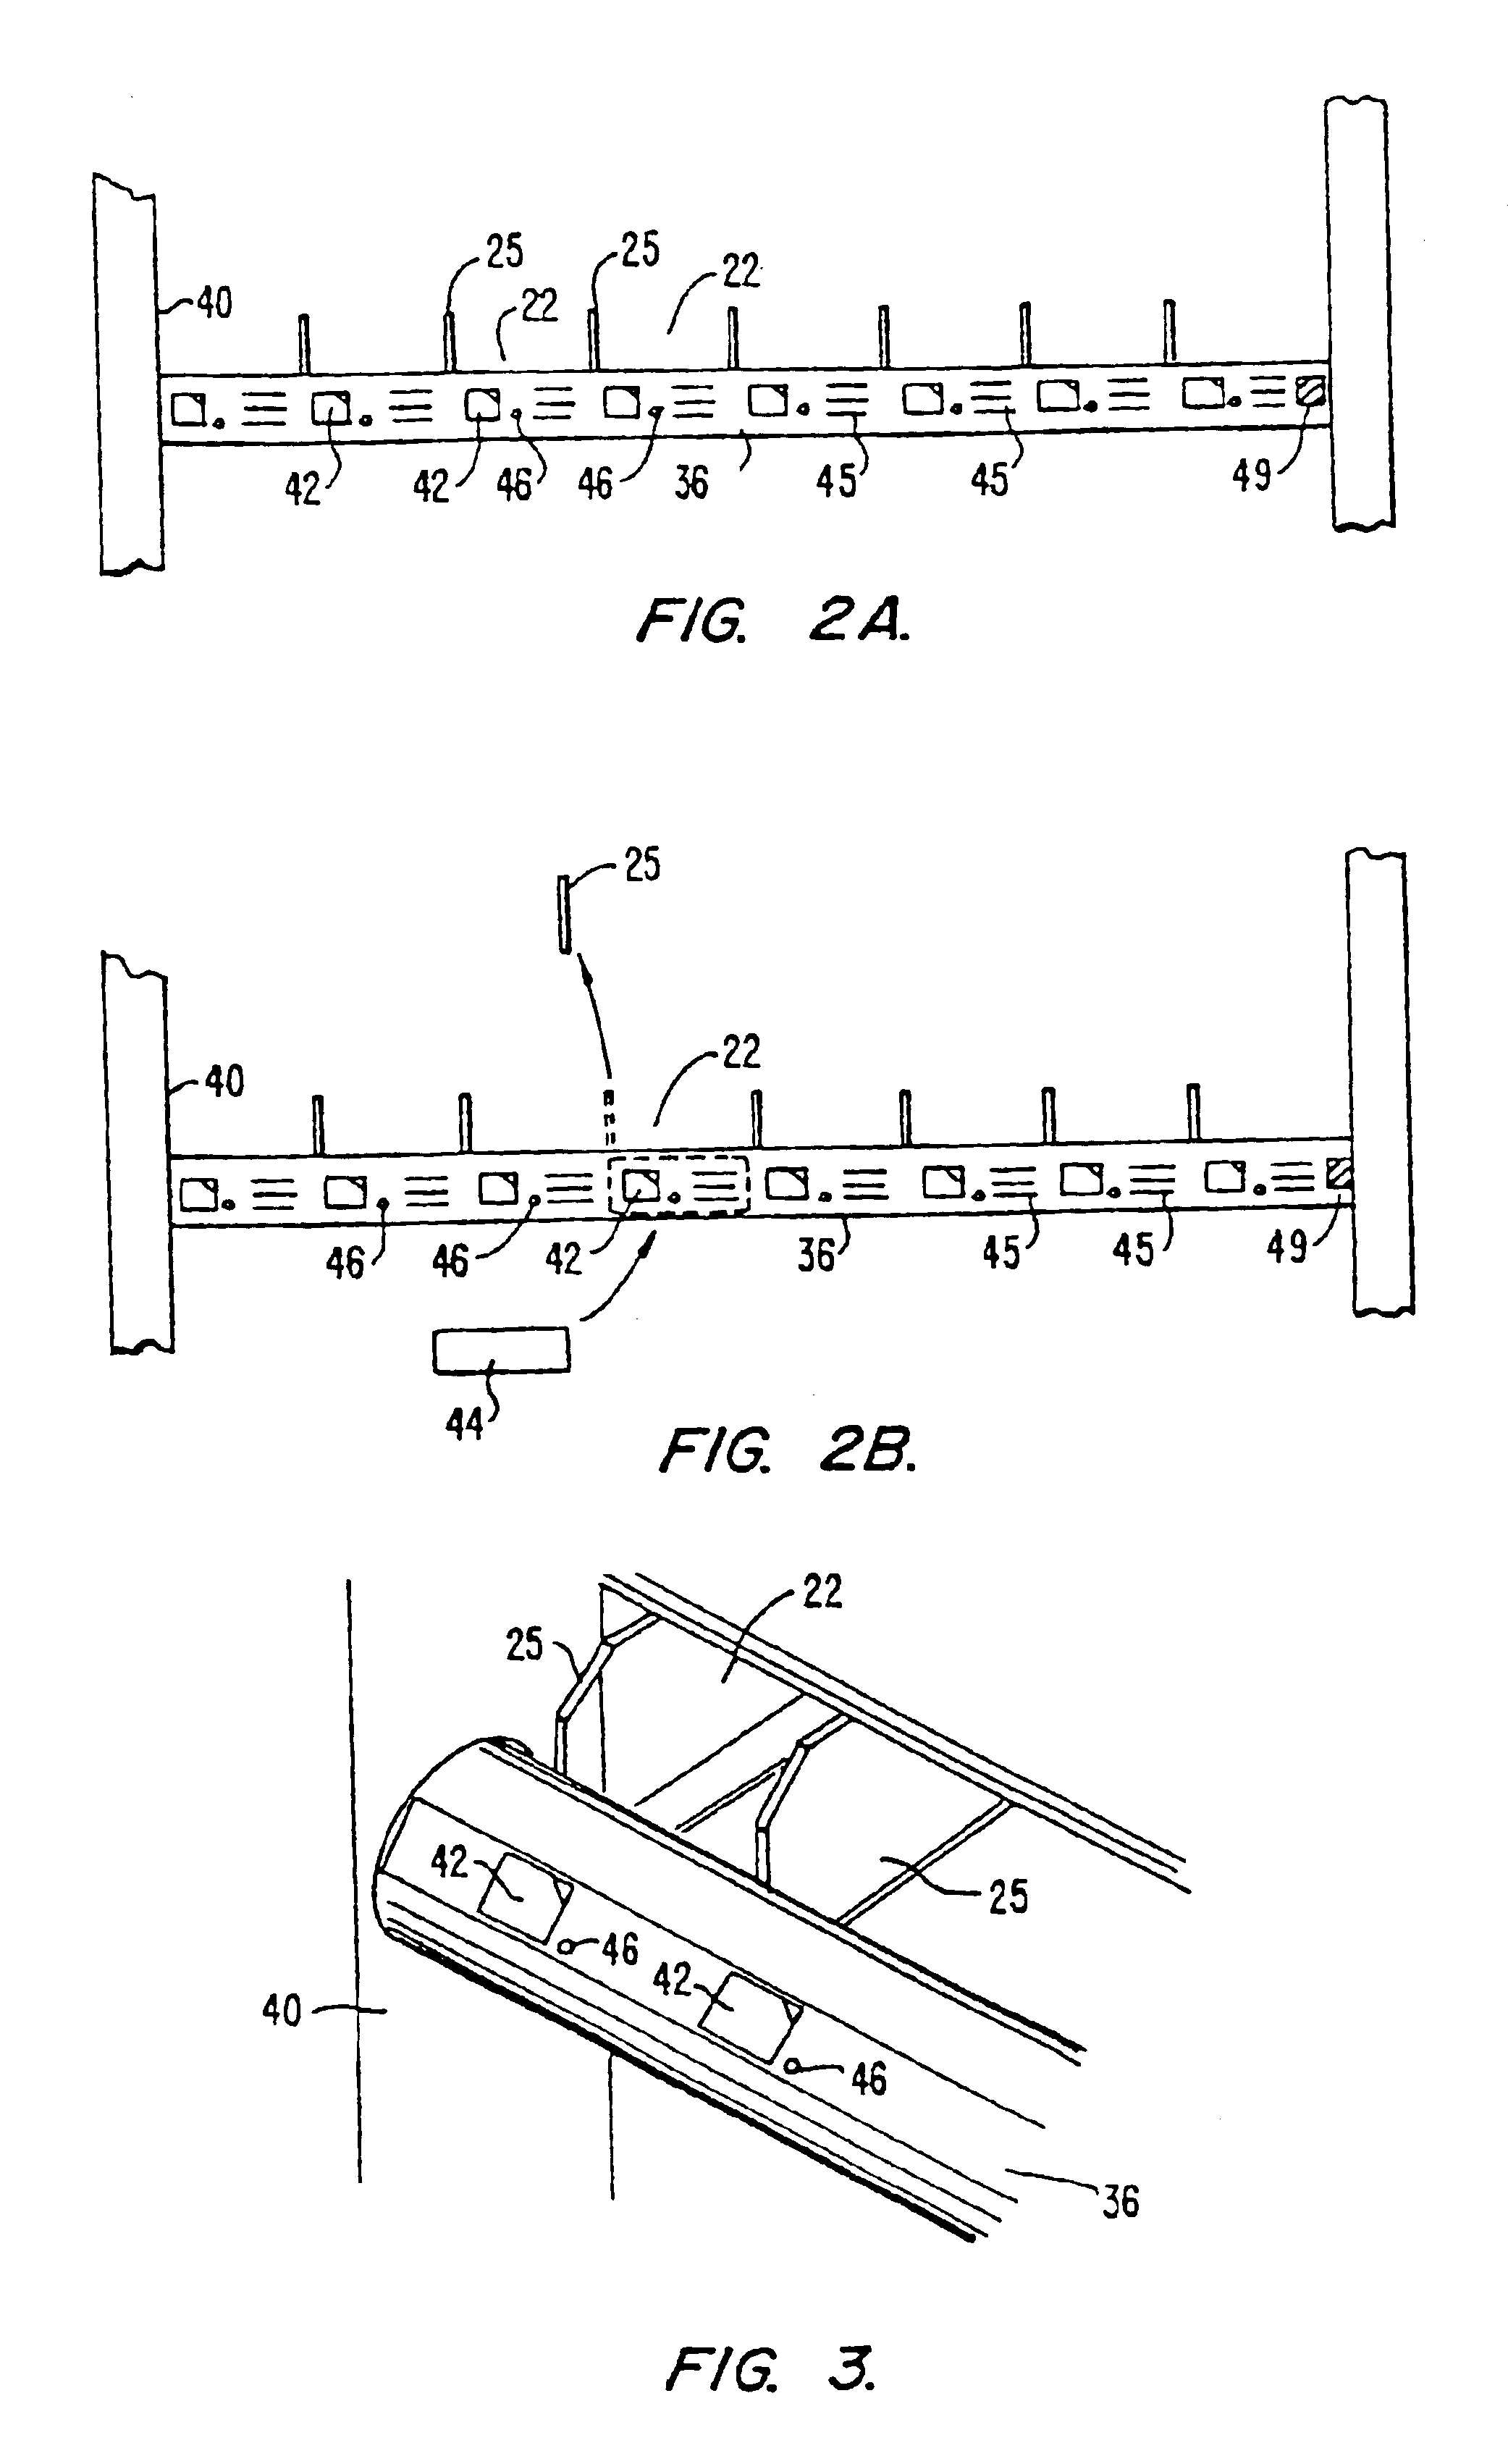 Methods and apparatus for dispensing items